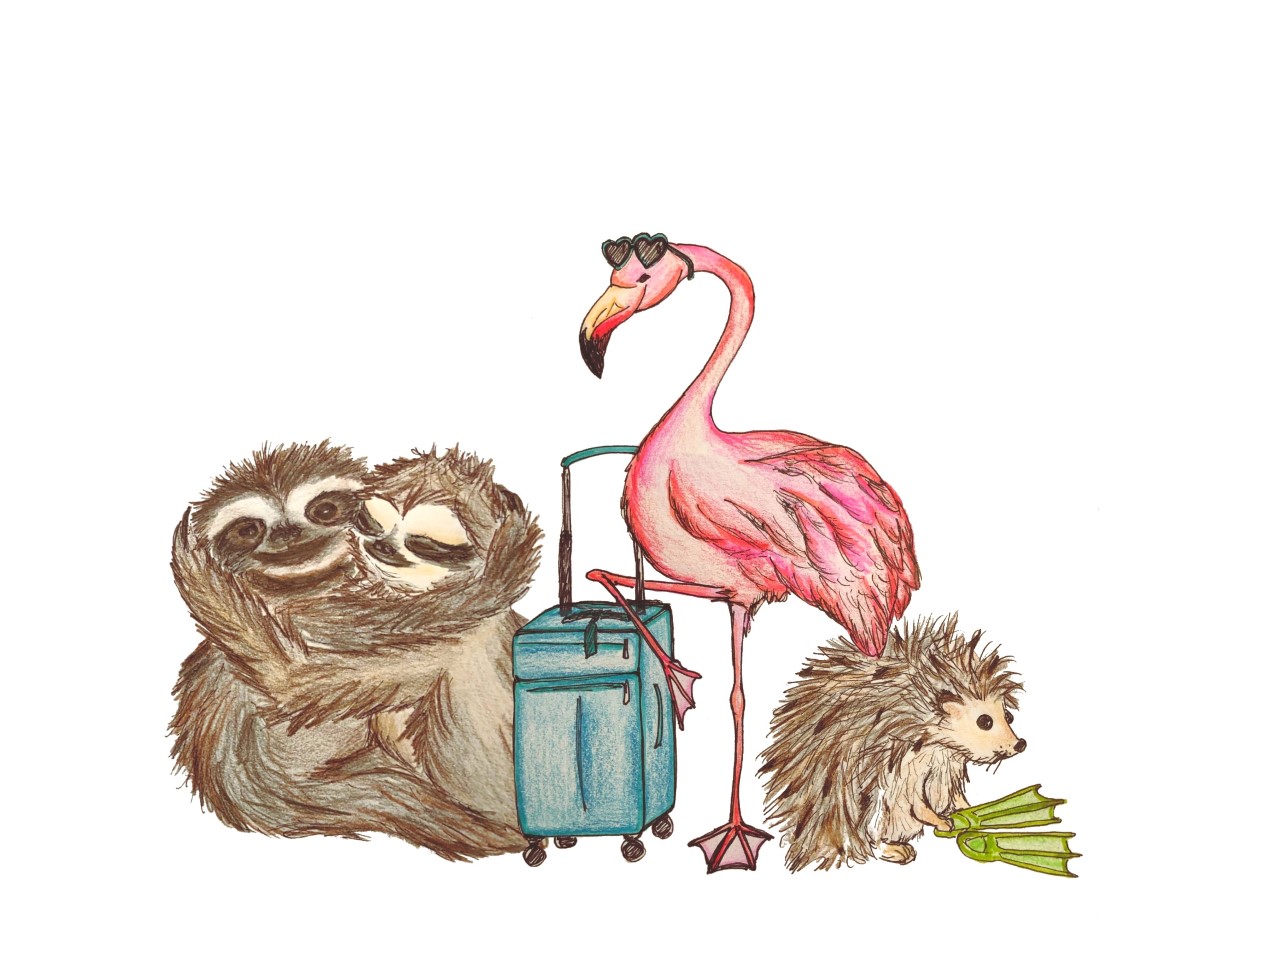 illustration depicting a group of animal friends getting ready to travel. Sloths hug each other, a flamingo wraps a leg around a rolling suitcase, a hedgehog tries on some swim fins